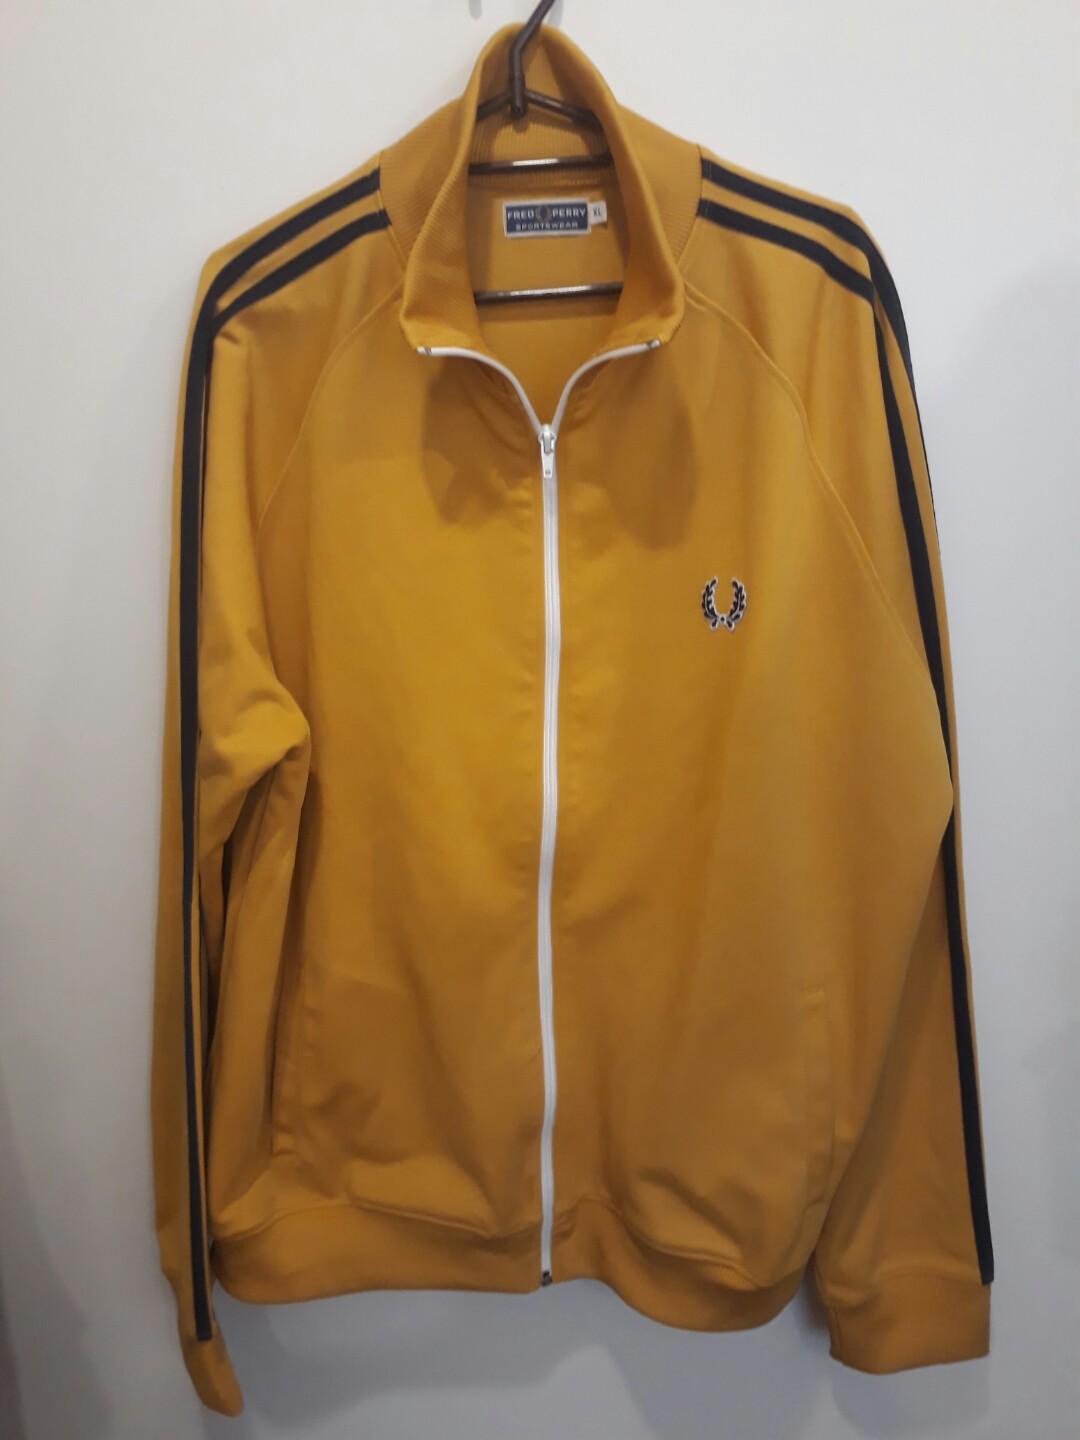 fred perry yellow track jacket